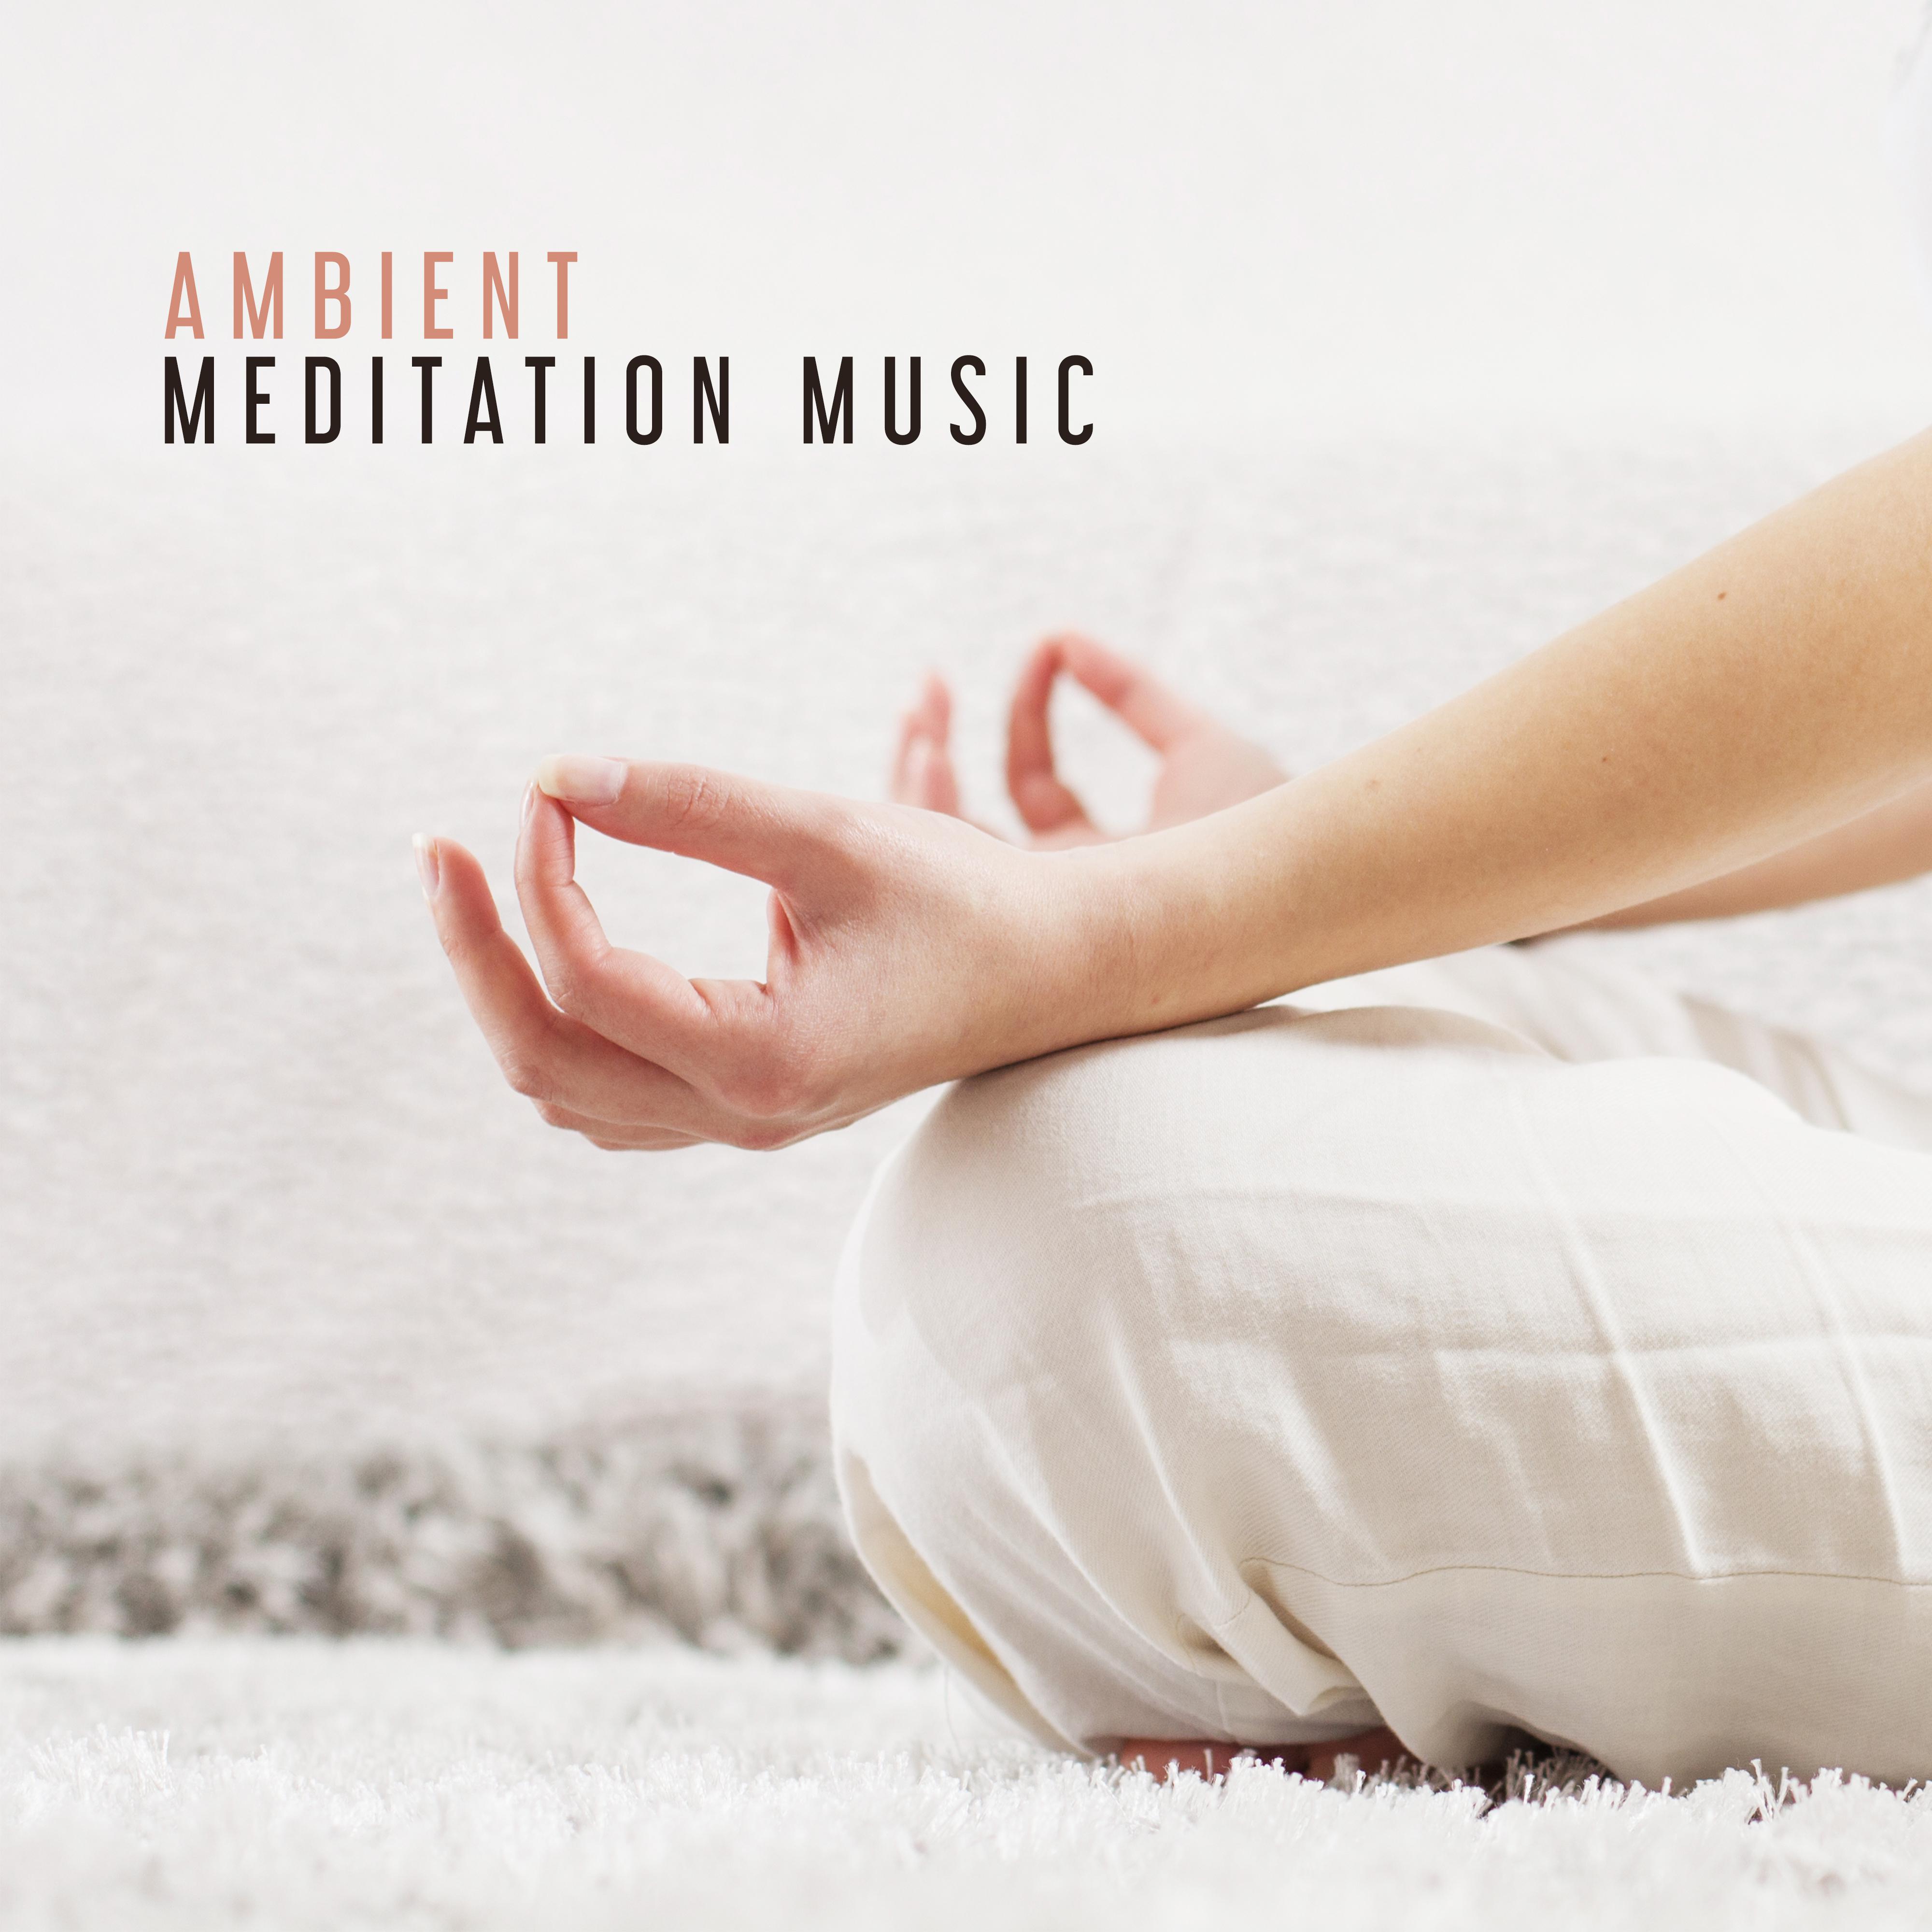 Ambient Meditation Music  Zen Chill Yoga, Peaceful Sounds for Relaxation, Sleep, Deep Meditation, Music for Mind, Zen Yoga